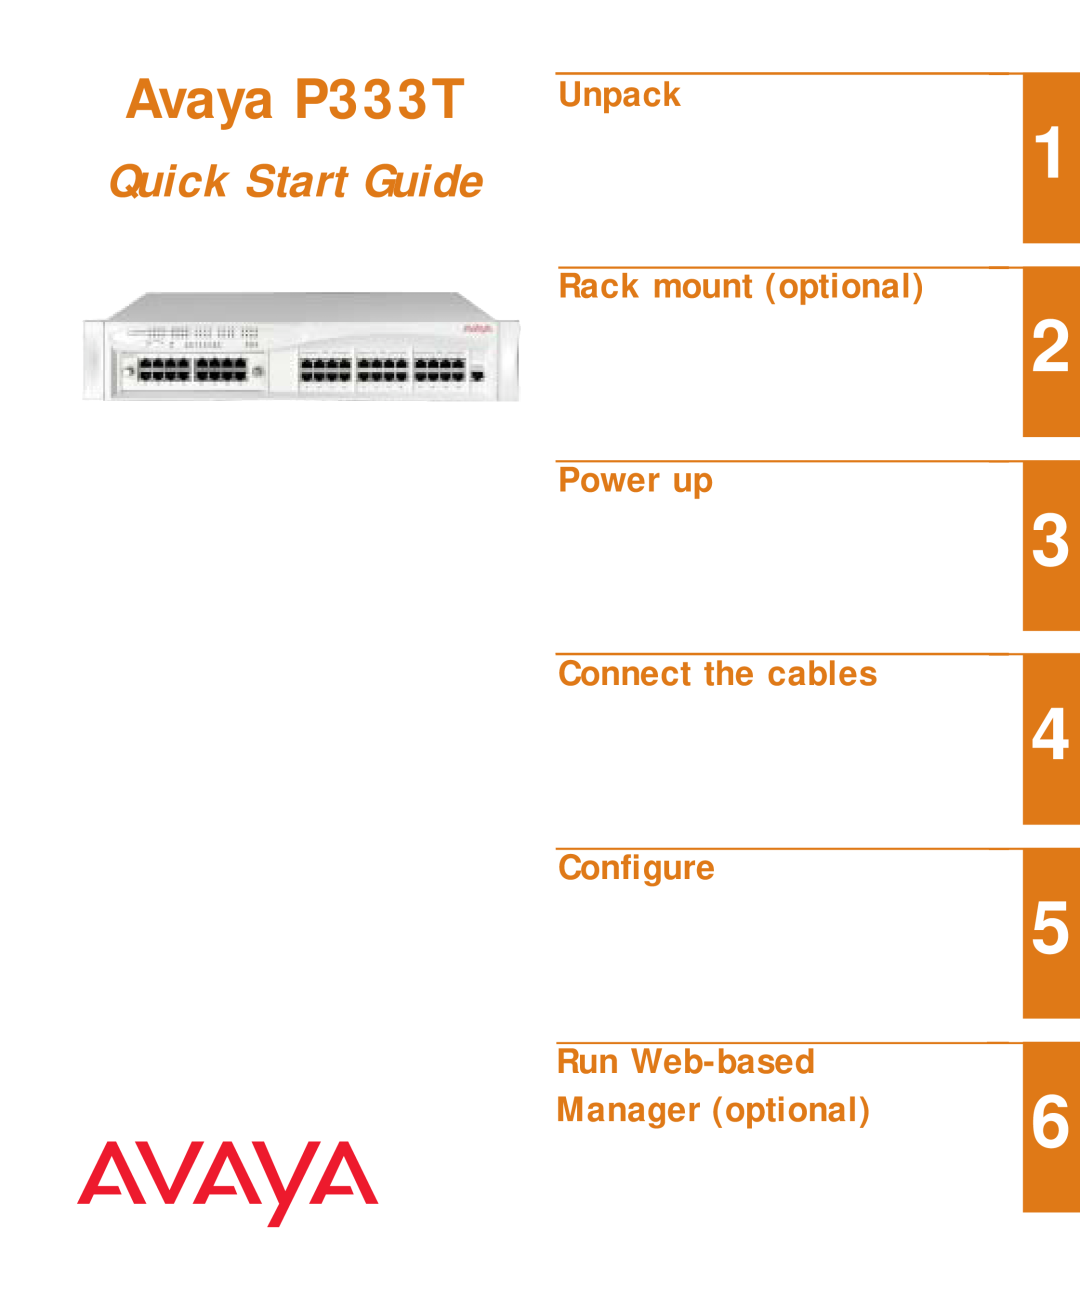 Avaya quick start Avaya P333T, Quick Start Guide, Unpack, Rack mount optional, Power up, Connect the cables, Configure 